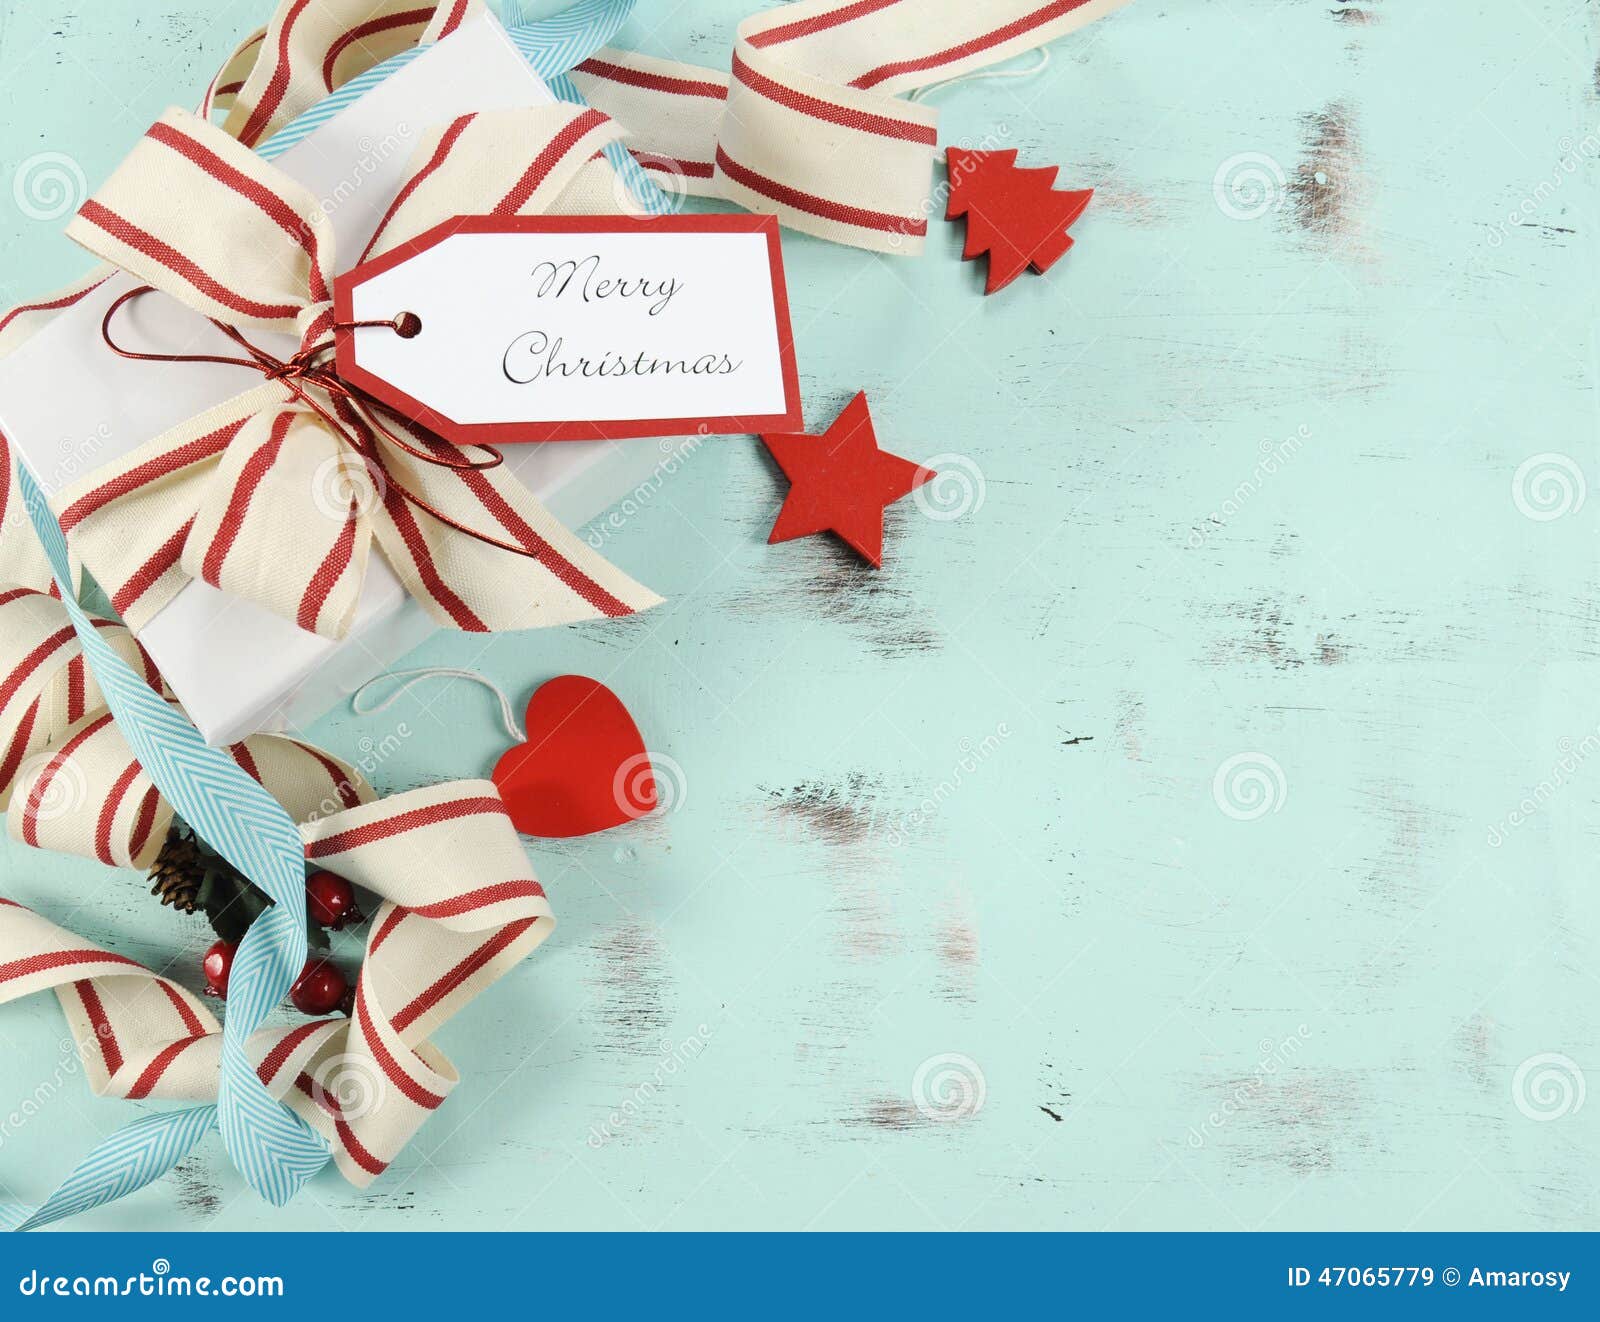 Modern Red And White Christmas Decorations On Aqua Blue 